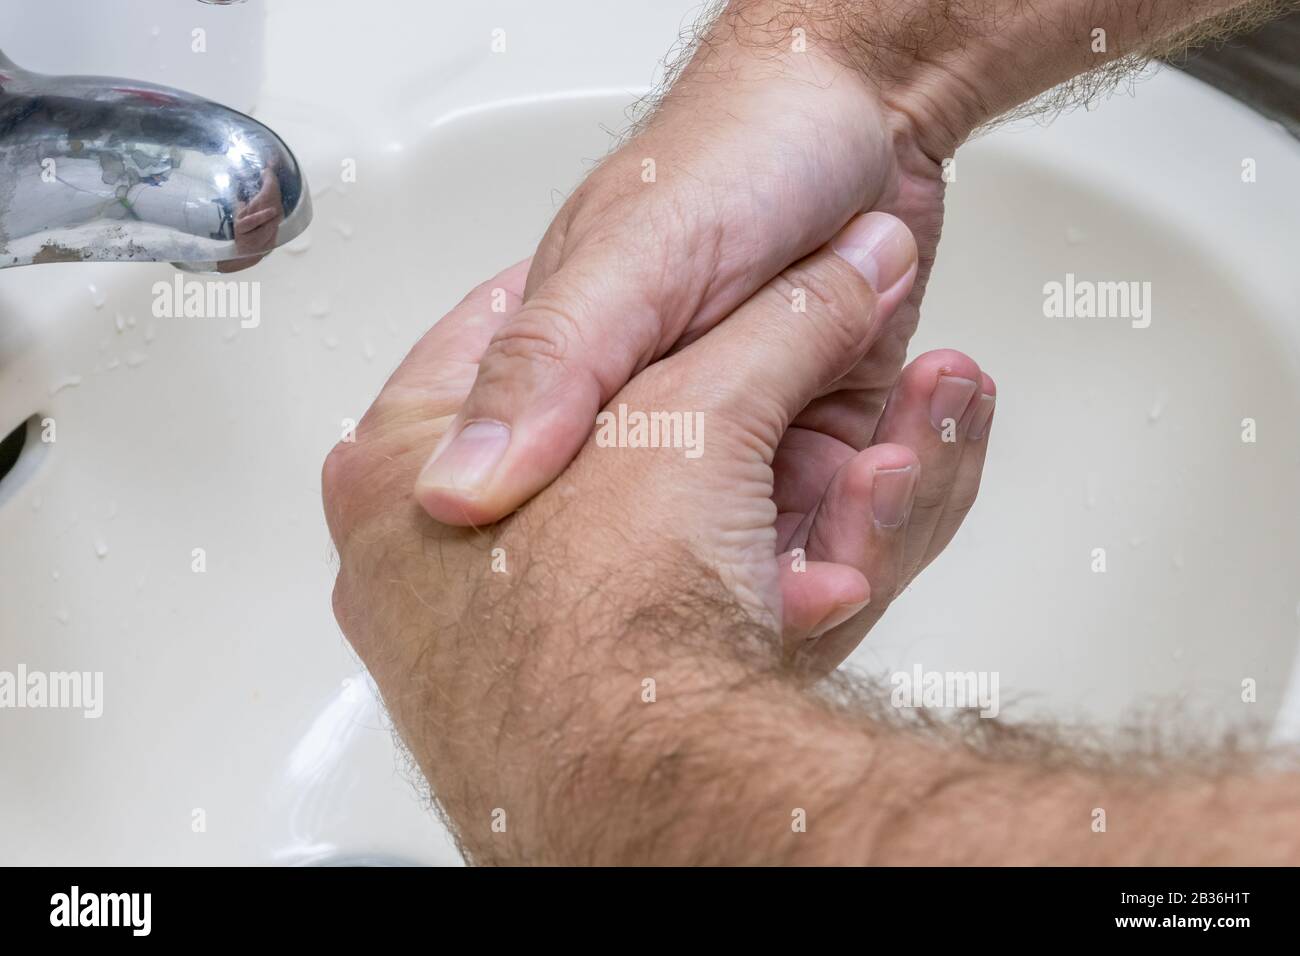 Man washing hands in basin close-up, one of several in handwashing steps series Stock Photo